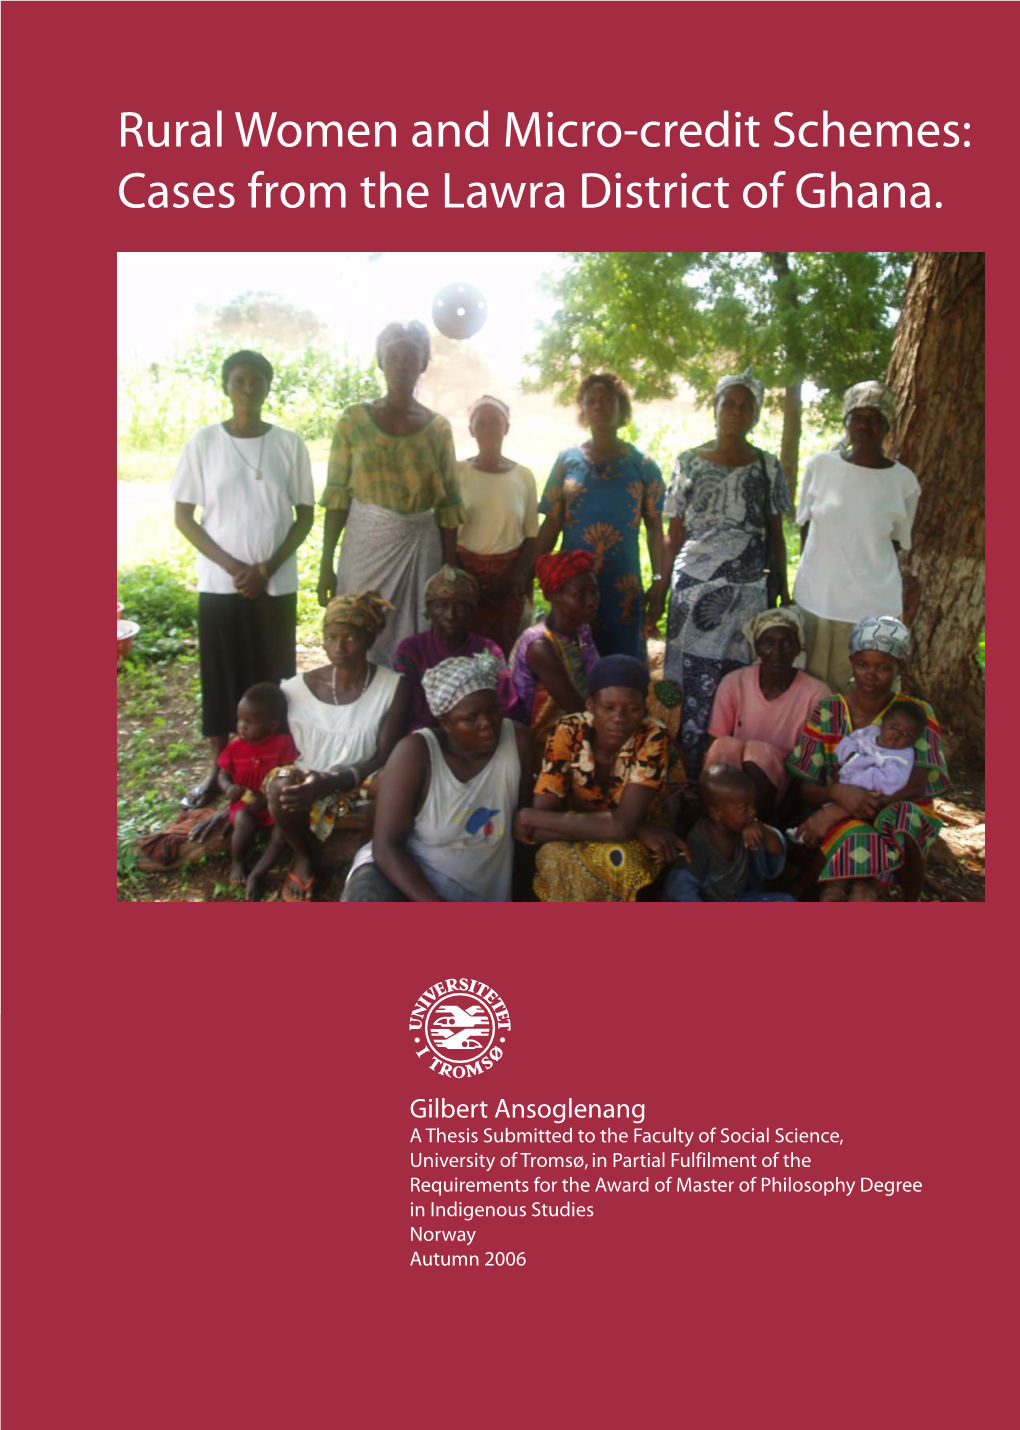 Rural Women and Micro-Credit Schemes: Cases from the Lawra District of Ghana